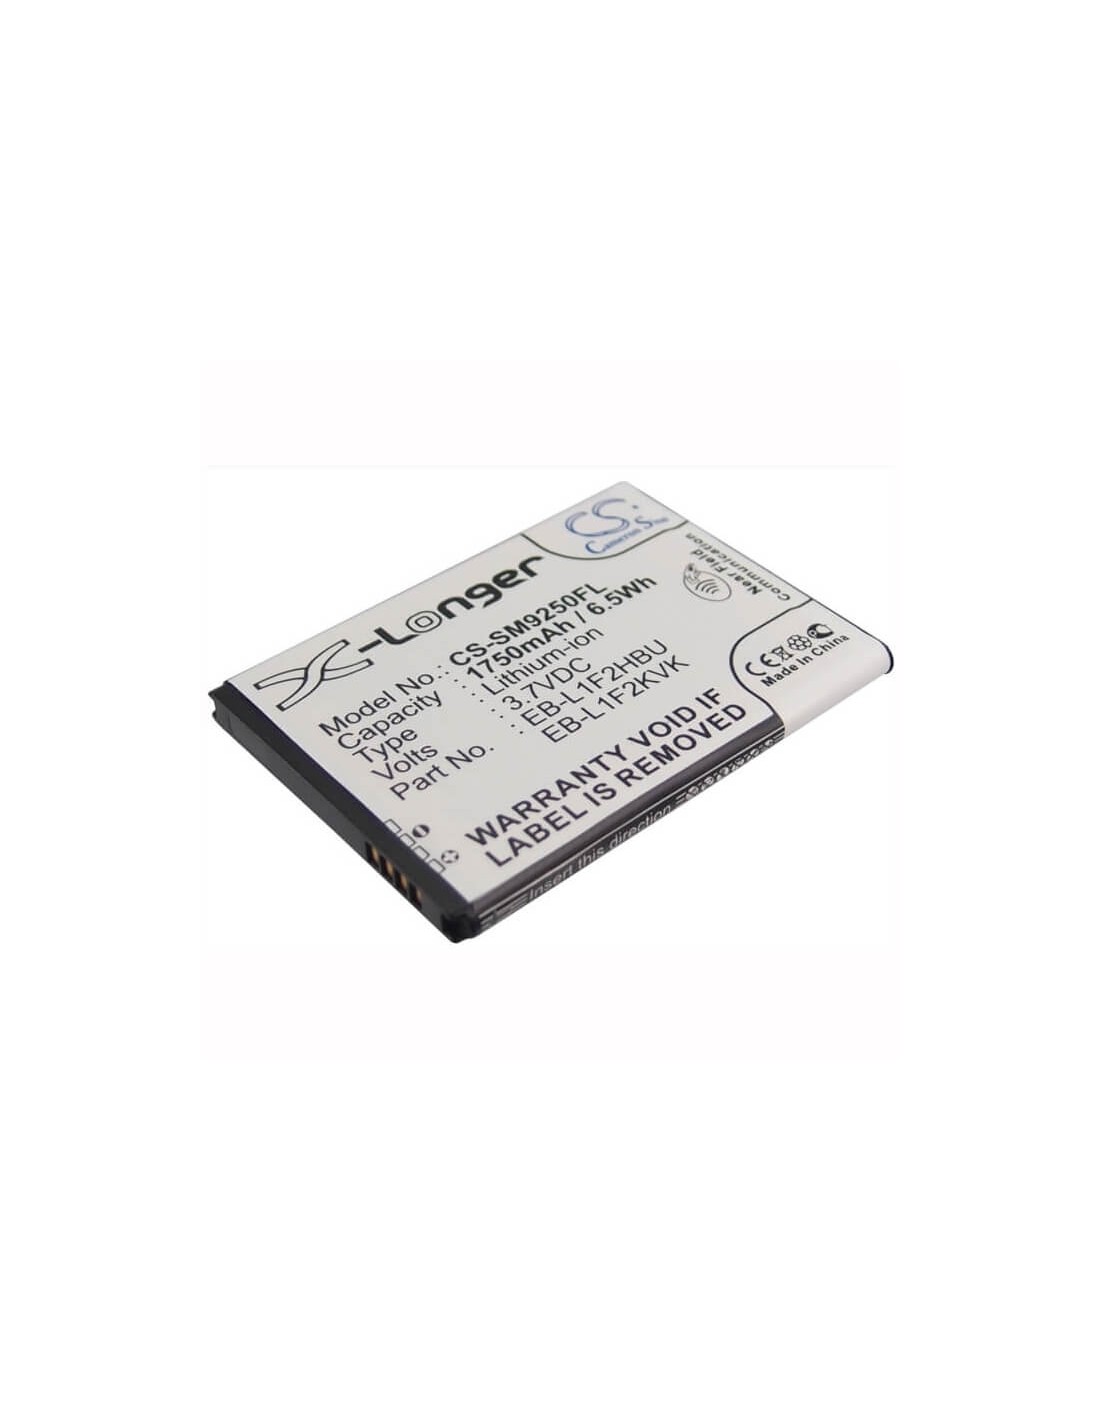 Battery for Samsung GT-i9250, Nexus Prime, Galaxy Nexus NFC support 3.7V, 1750mAh - 6.48Wh